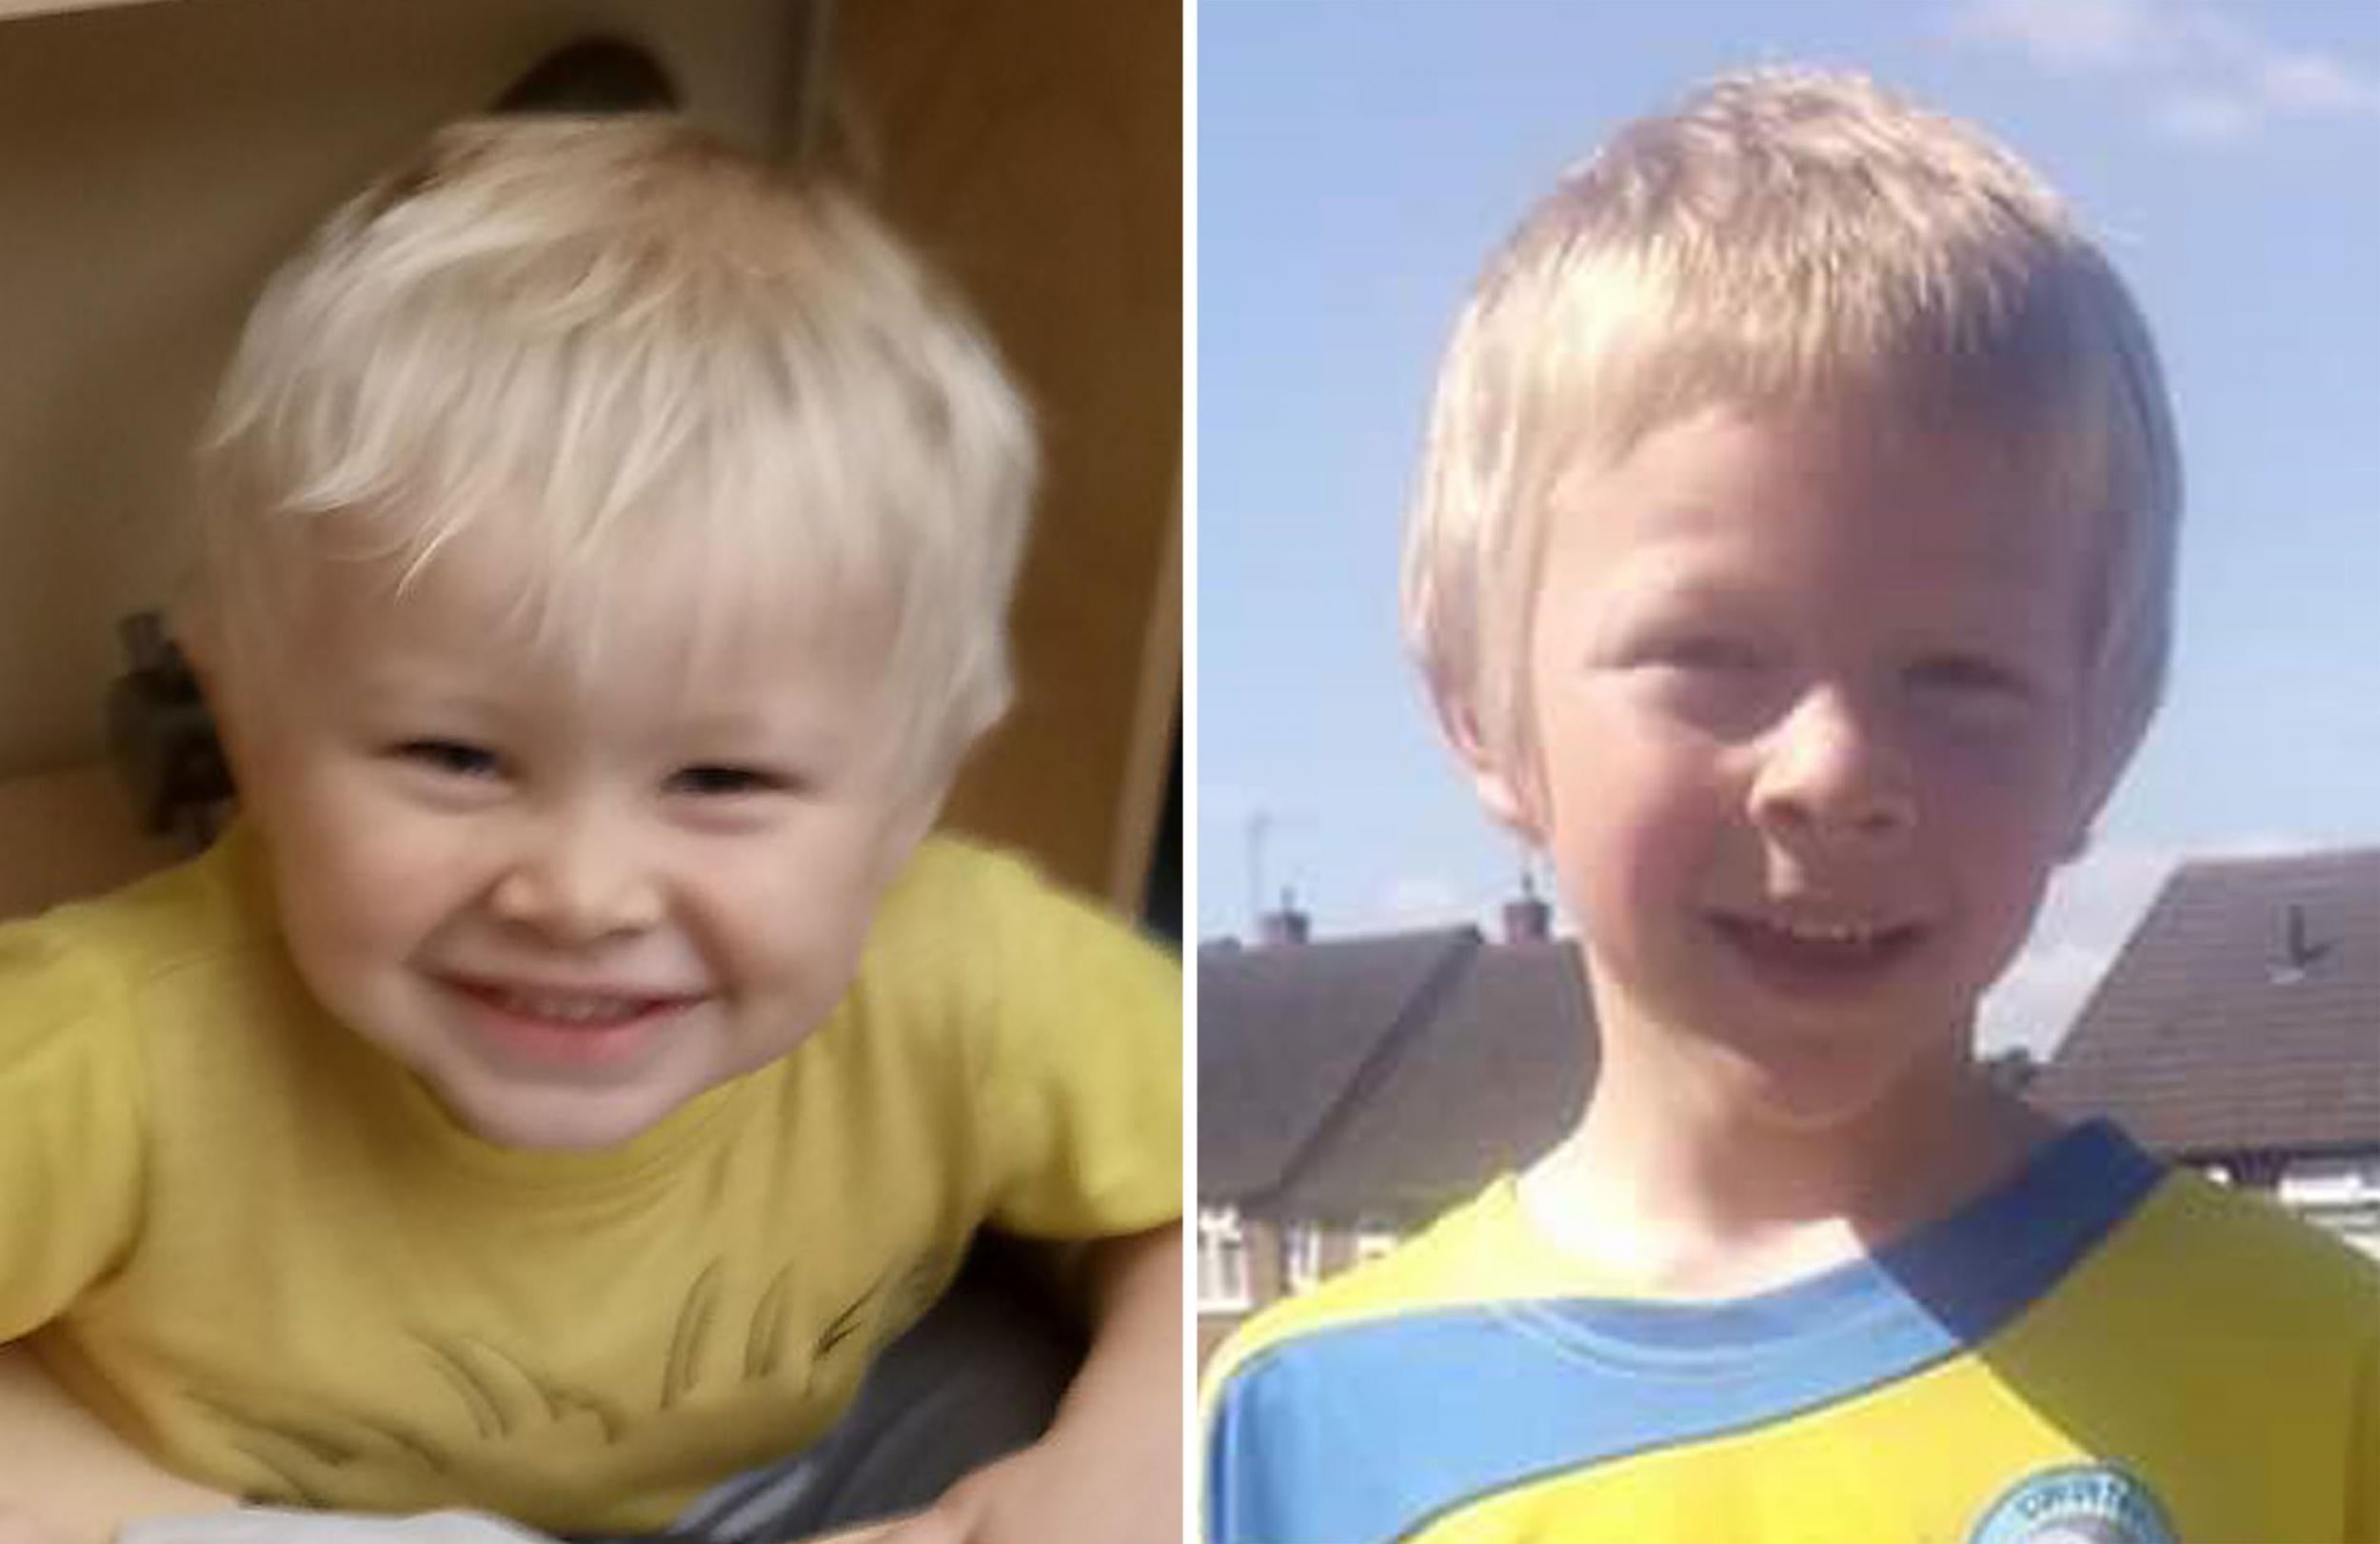 Two year old Casper Platt-May and his six-year-old brother Corey were killed in a hit-and-run collision in Coventry